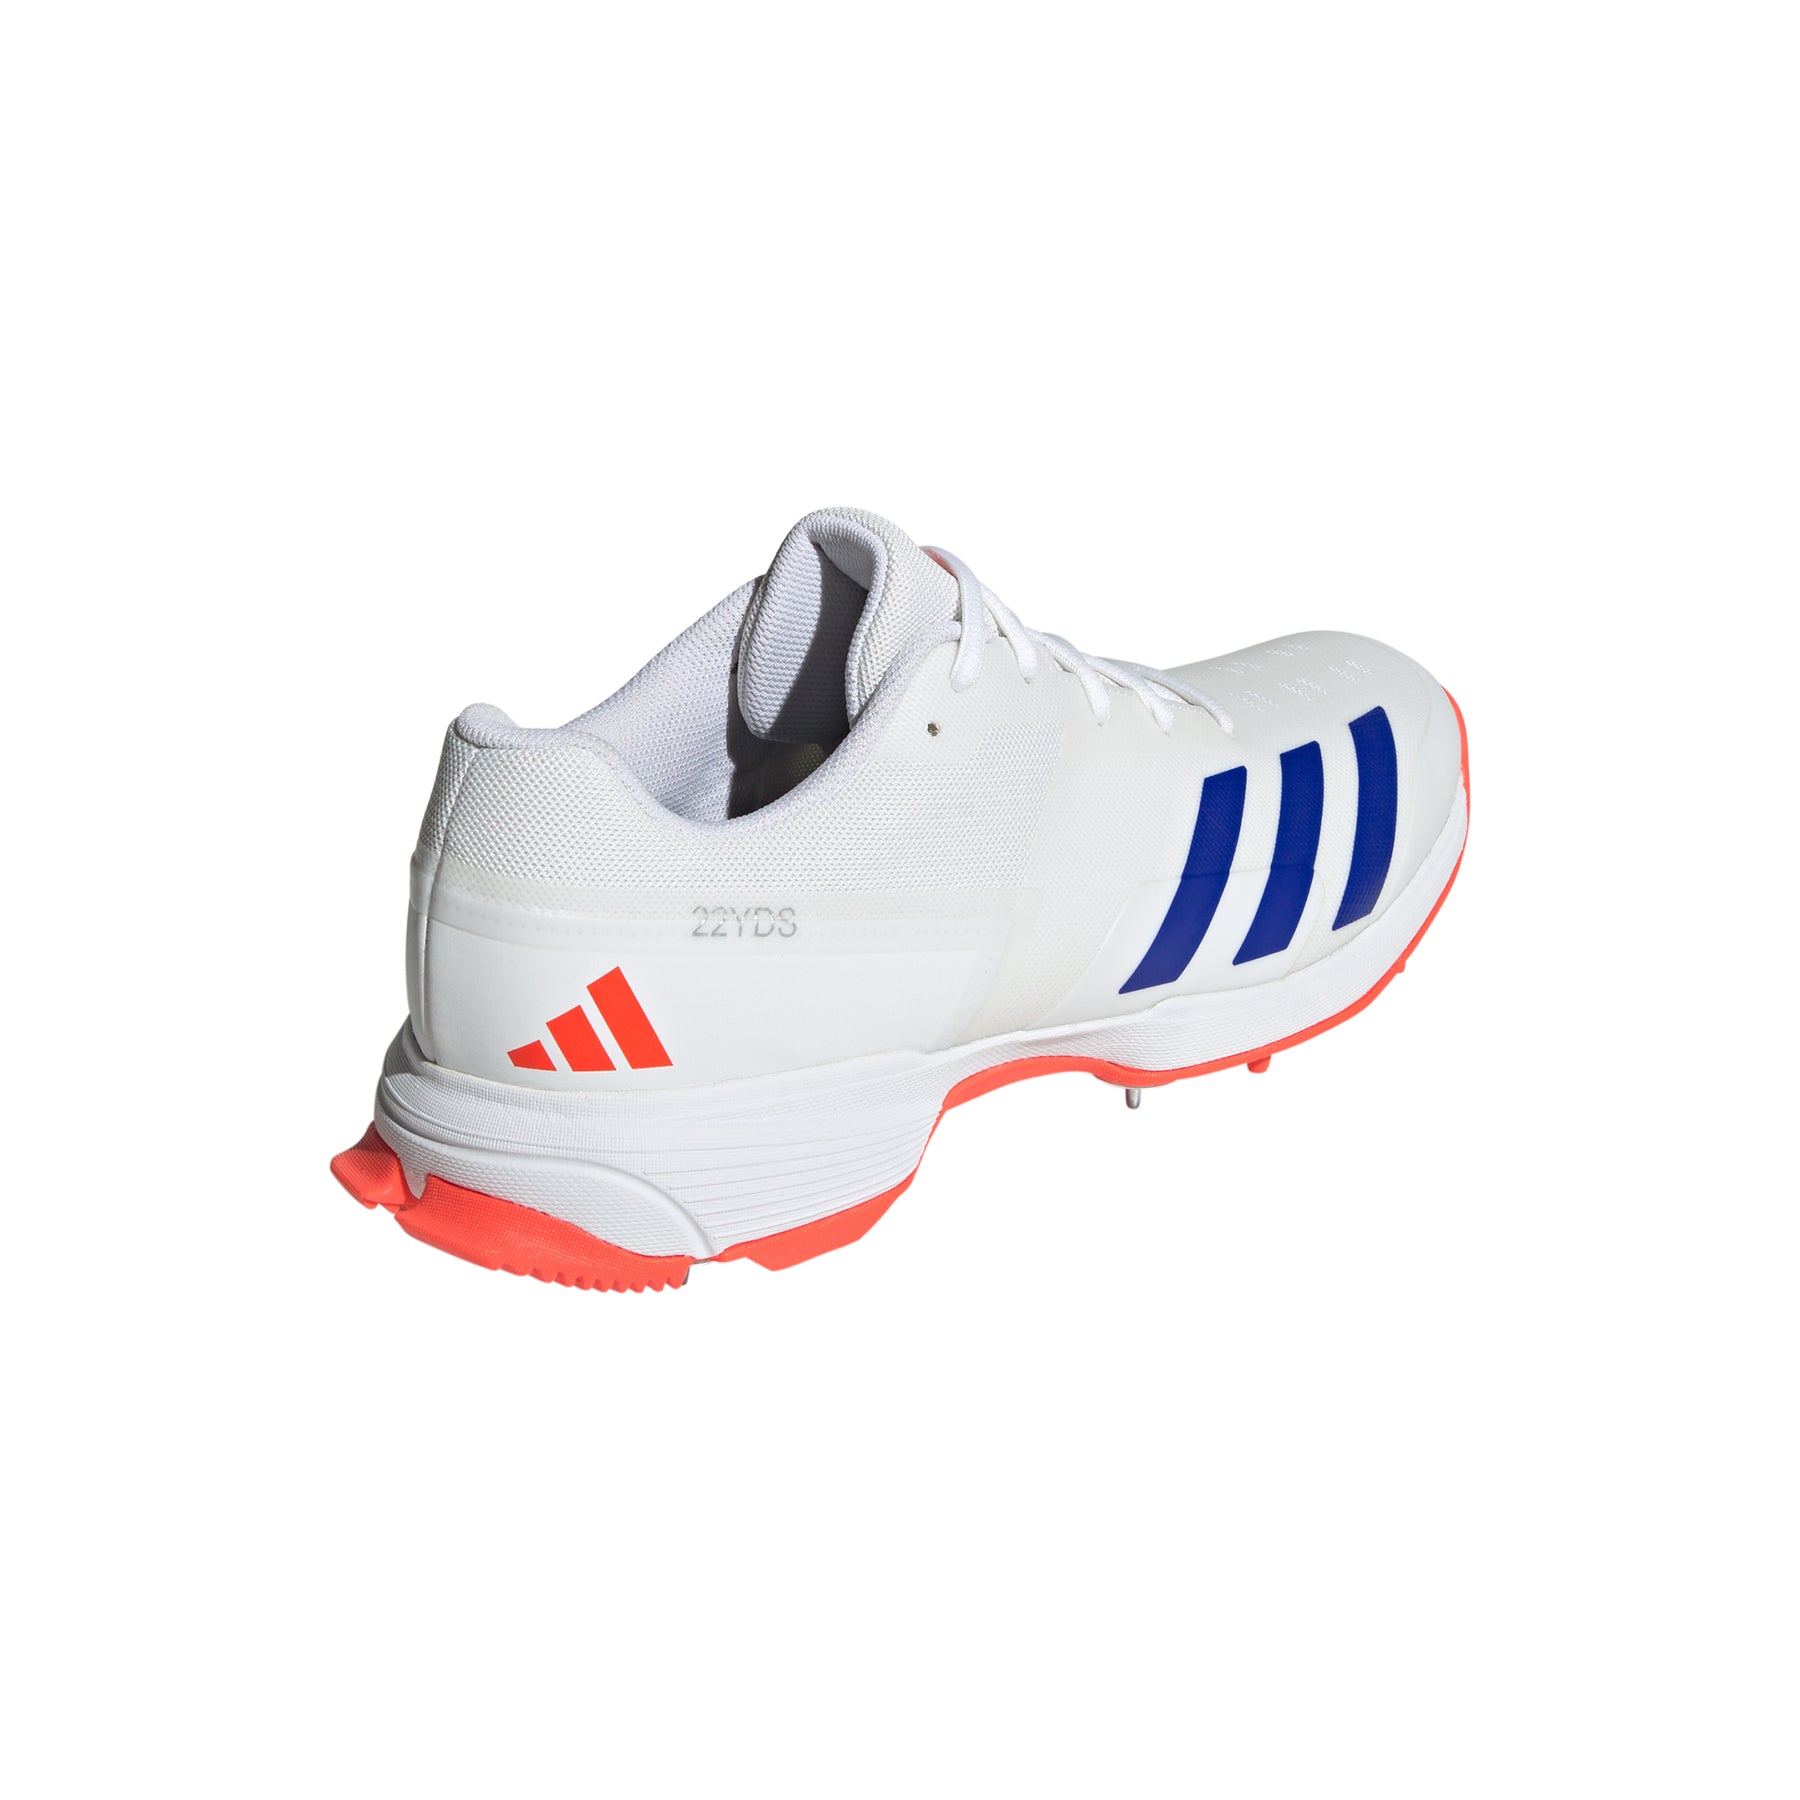 Adidas 22YDS Spike Adult Cricket Shoes 2024